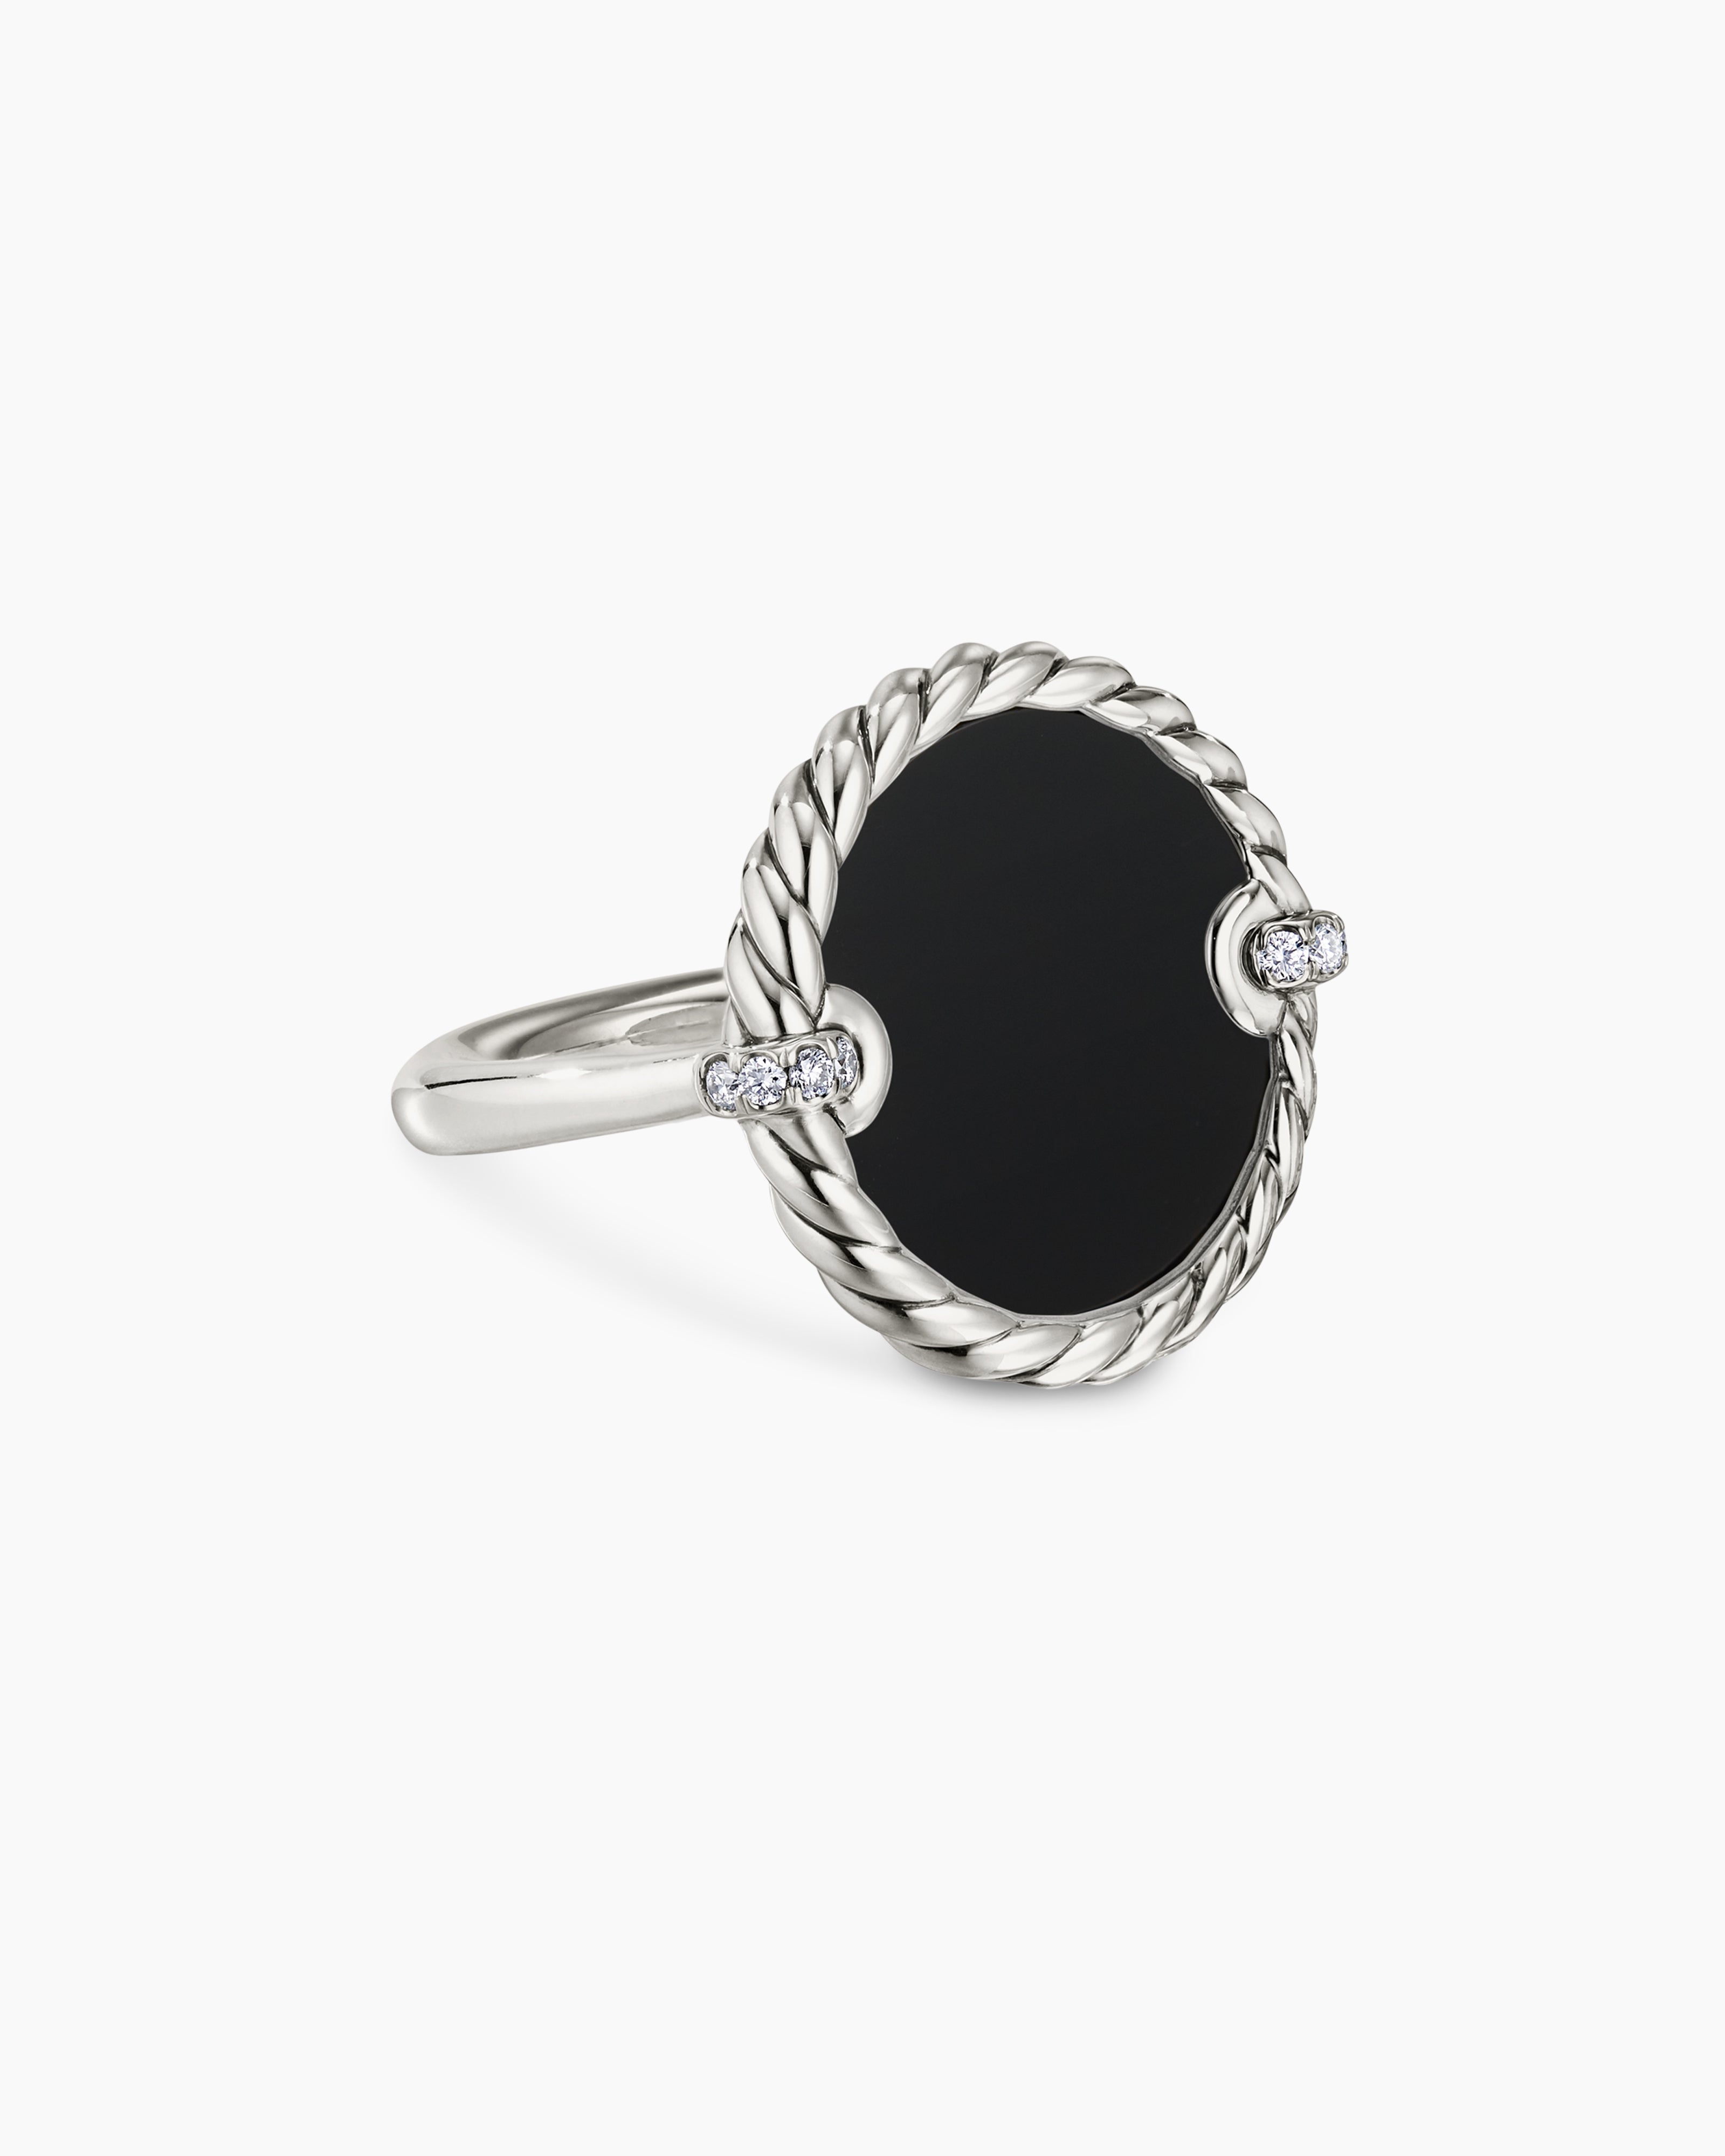 Black Onyx Ring , 925 Sterling Silver Ring , Handmade Ring Gemstone Ring ,  Women Gift , Black Stone Ring , Boho Ring , Silver Jewelry - Etsy